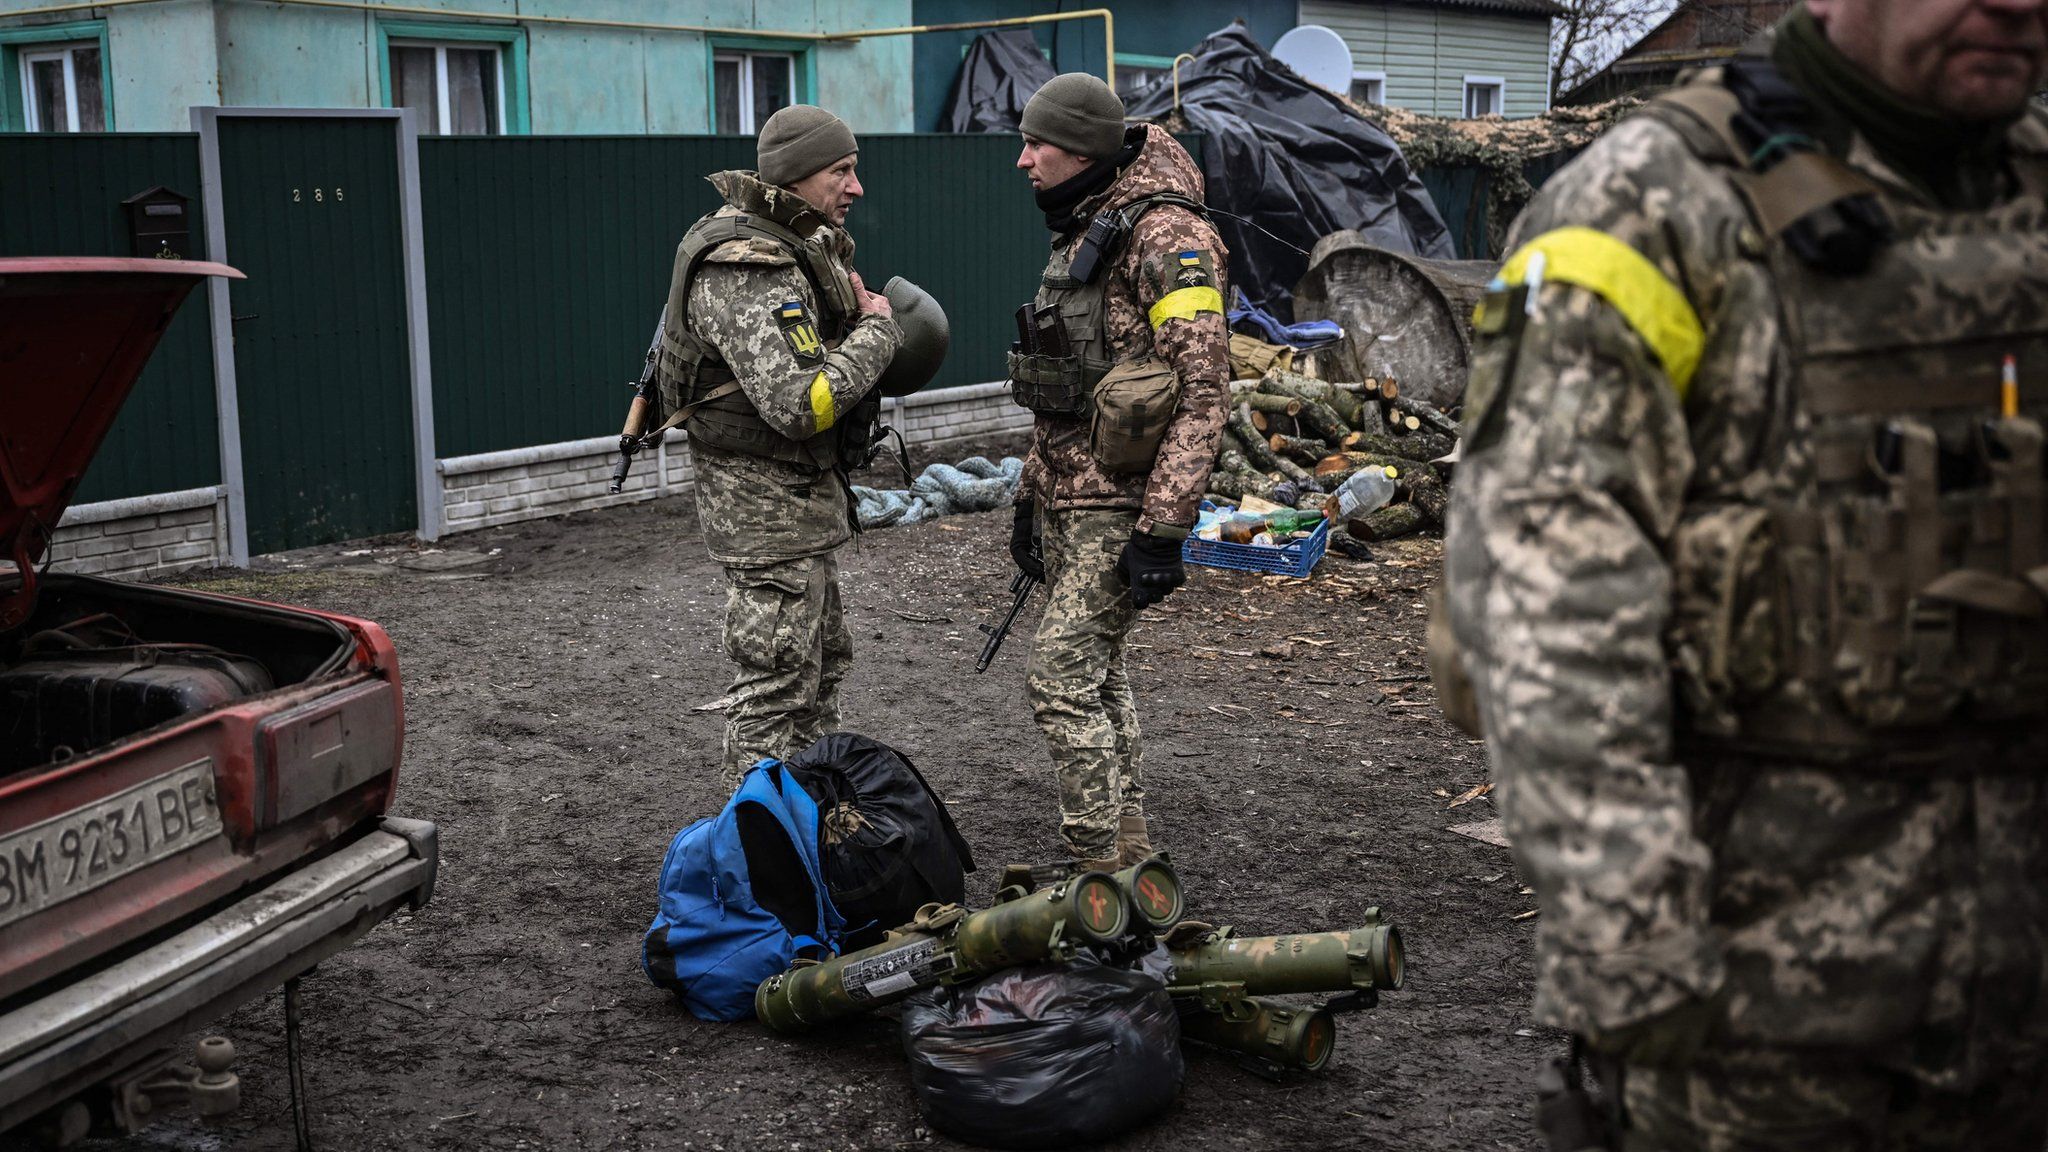 Ukrainian soldiers talk as they stand near their weapons at a frontline, northeast of Kyiv on March 3, 2022.